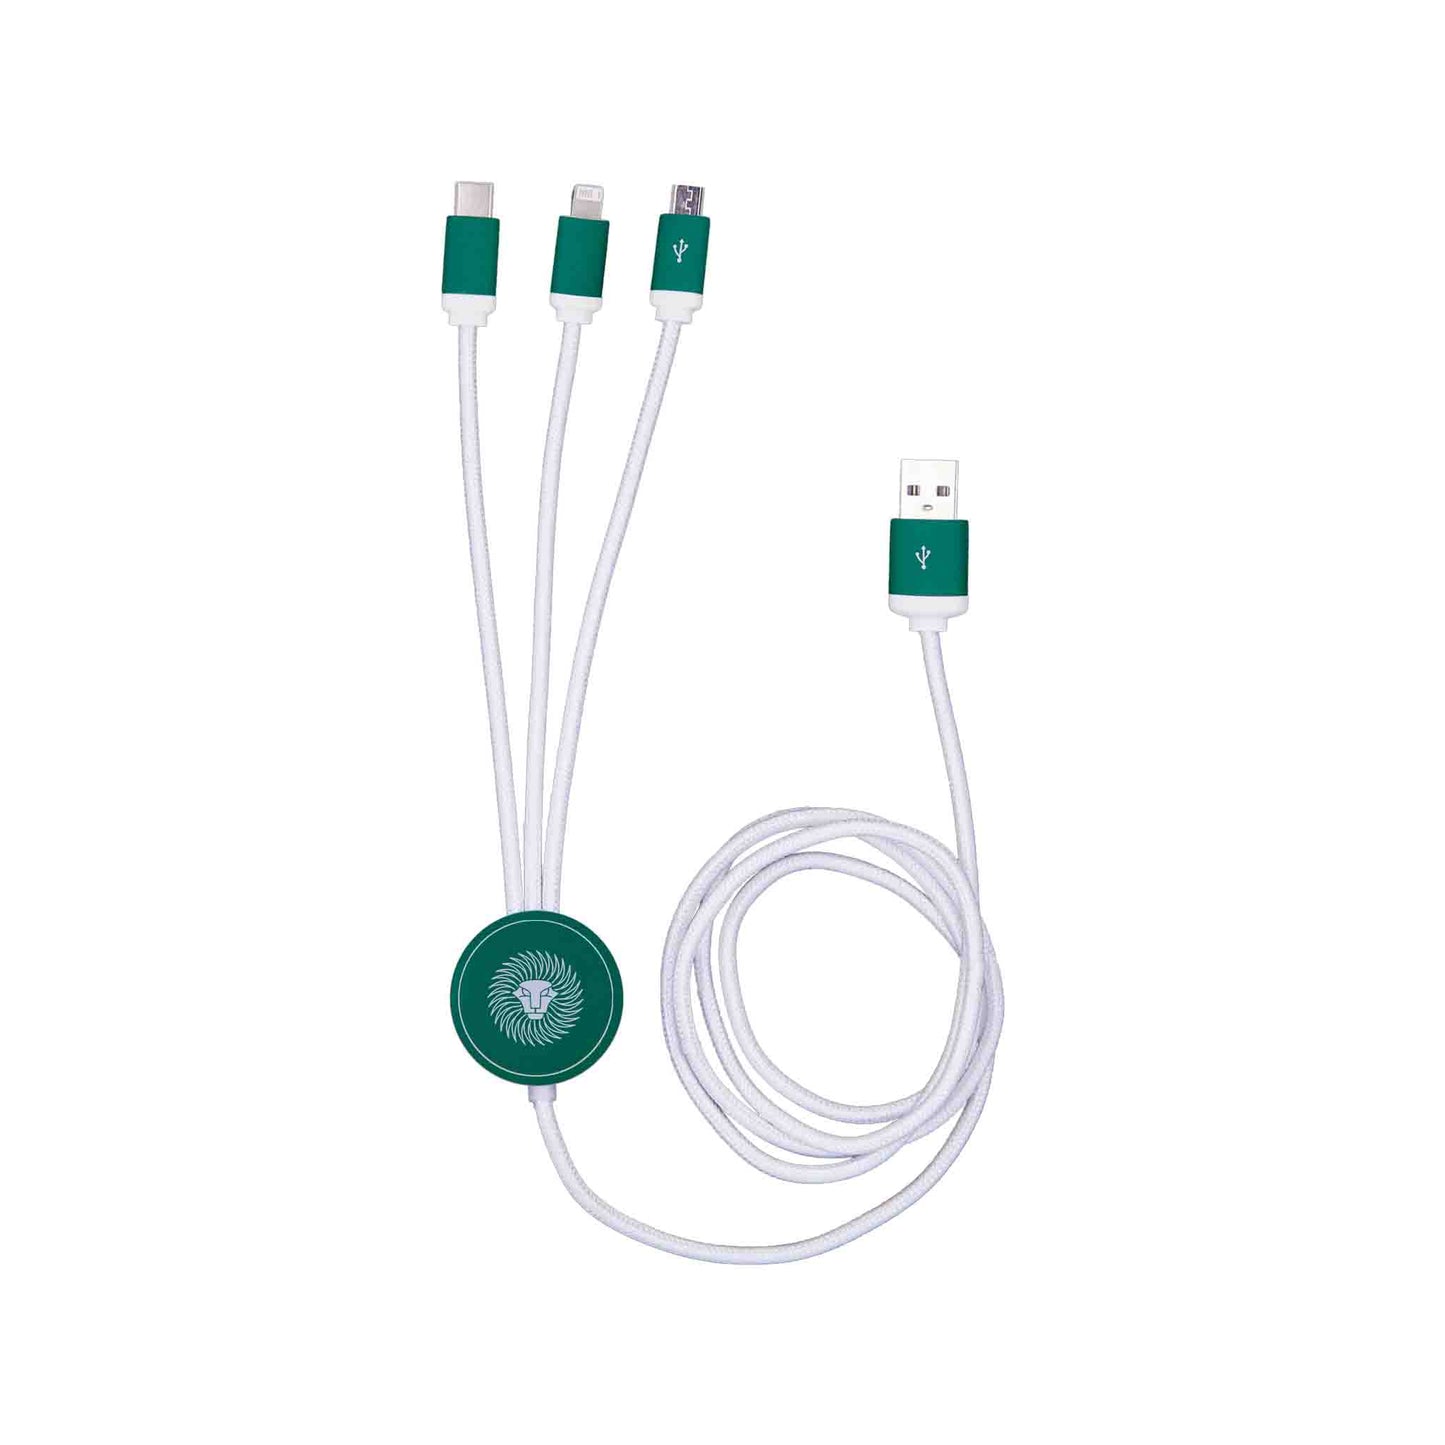 MagCable 3in1 LED "long" USB cable